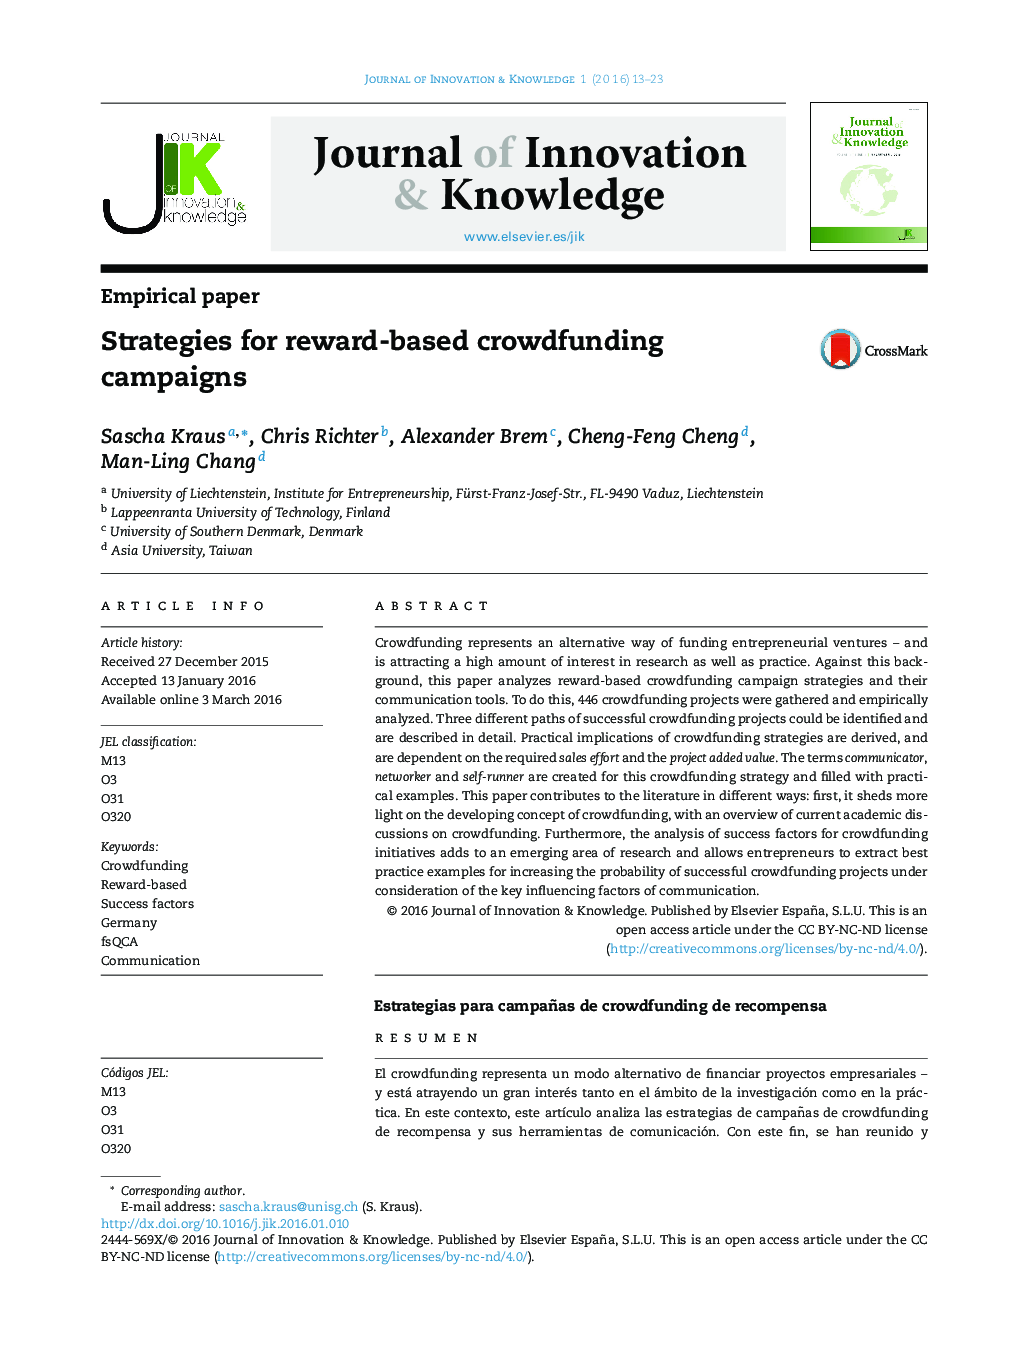 Strategies for reward-based crowdfunding campaigns